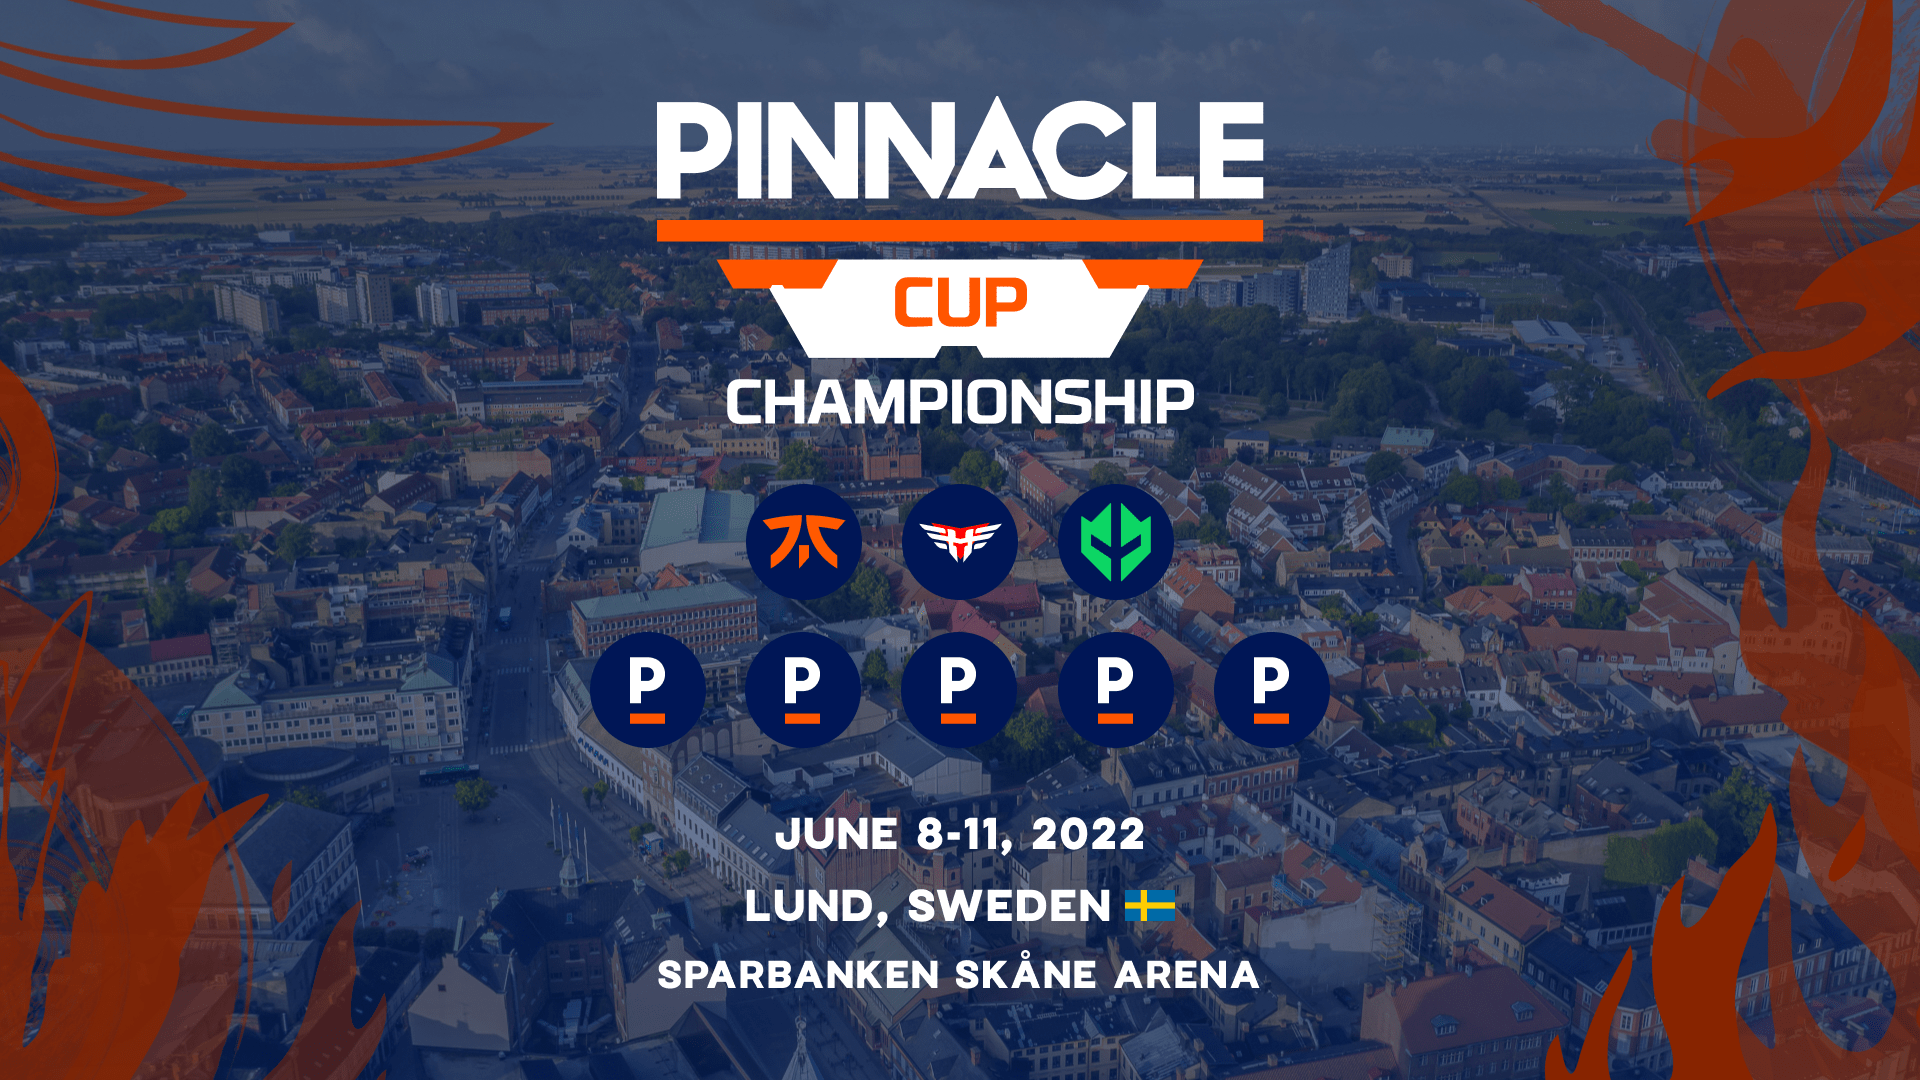 Pinnacle Cup Championship Finals set to take place in Lund, Sweden